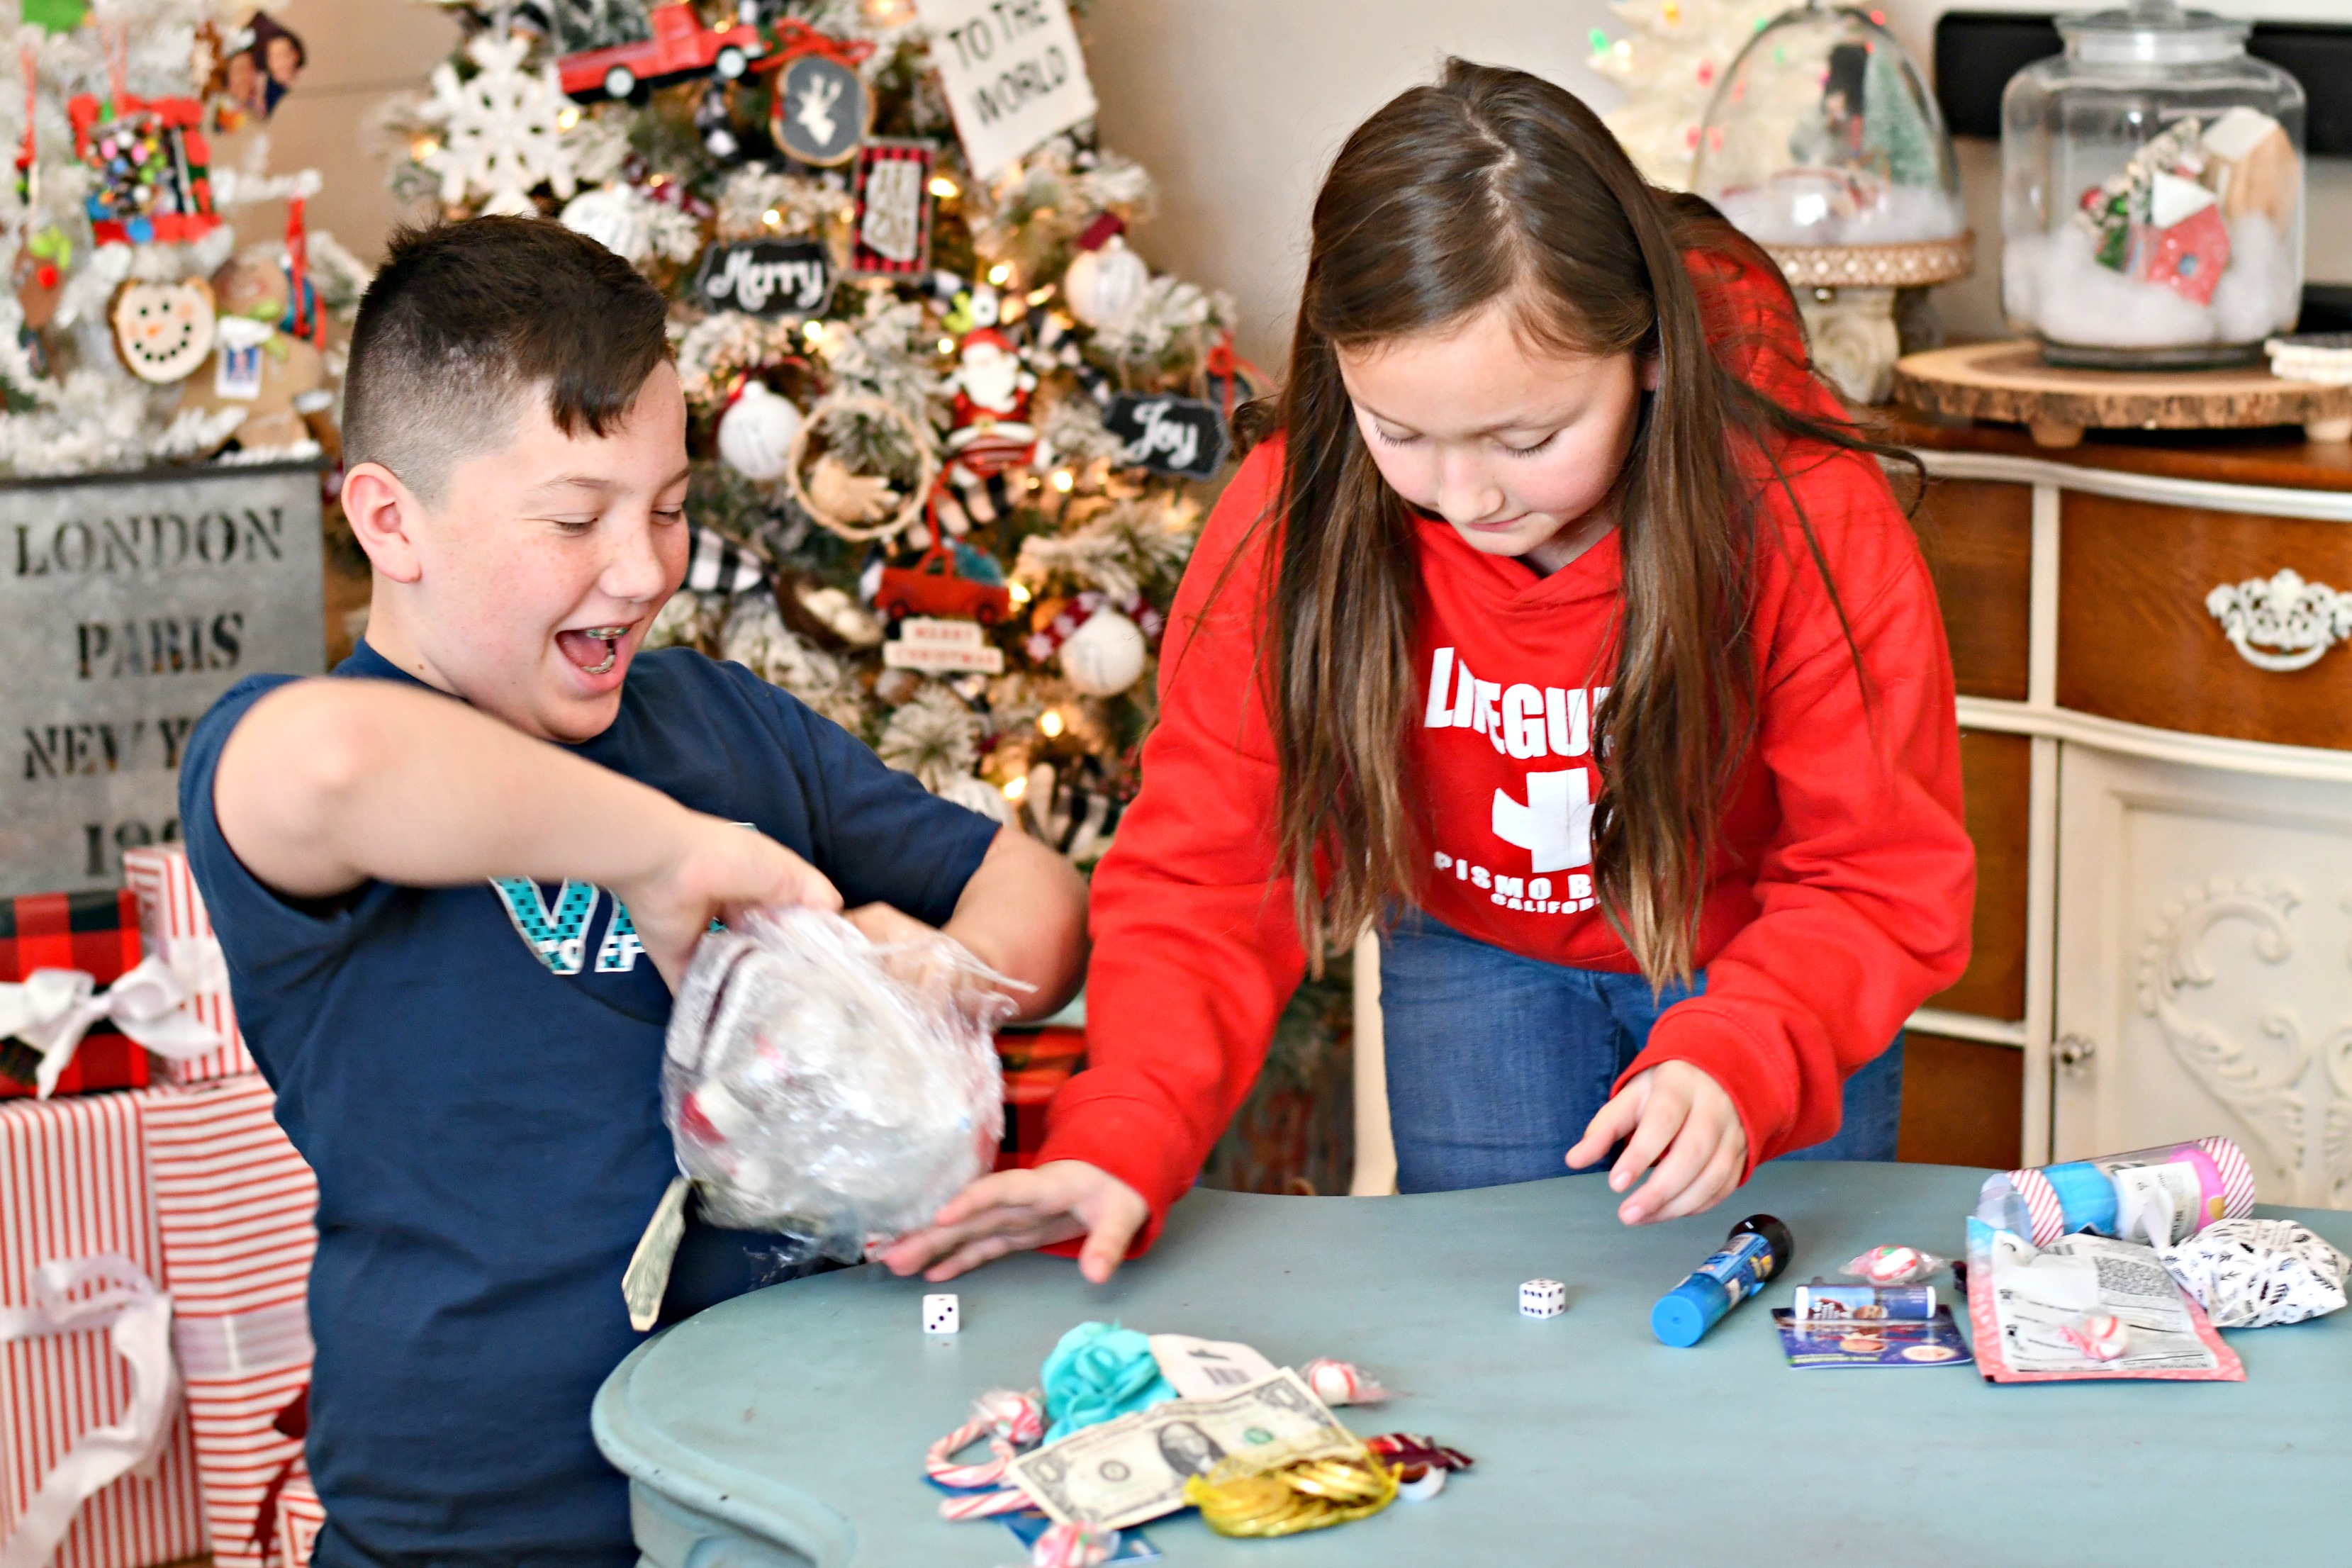 Saran wrap game holiday party game – Playing the game